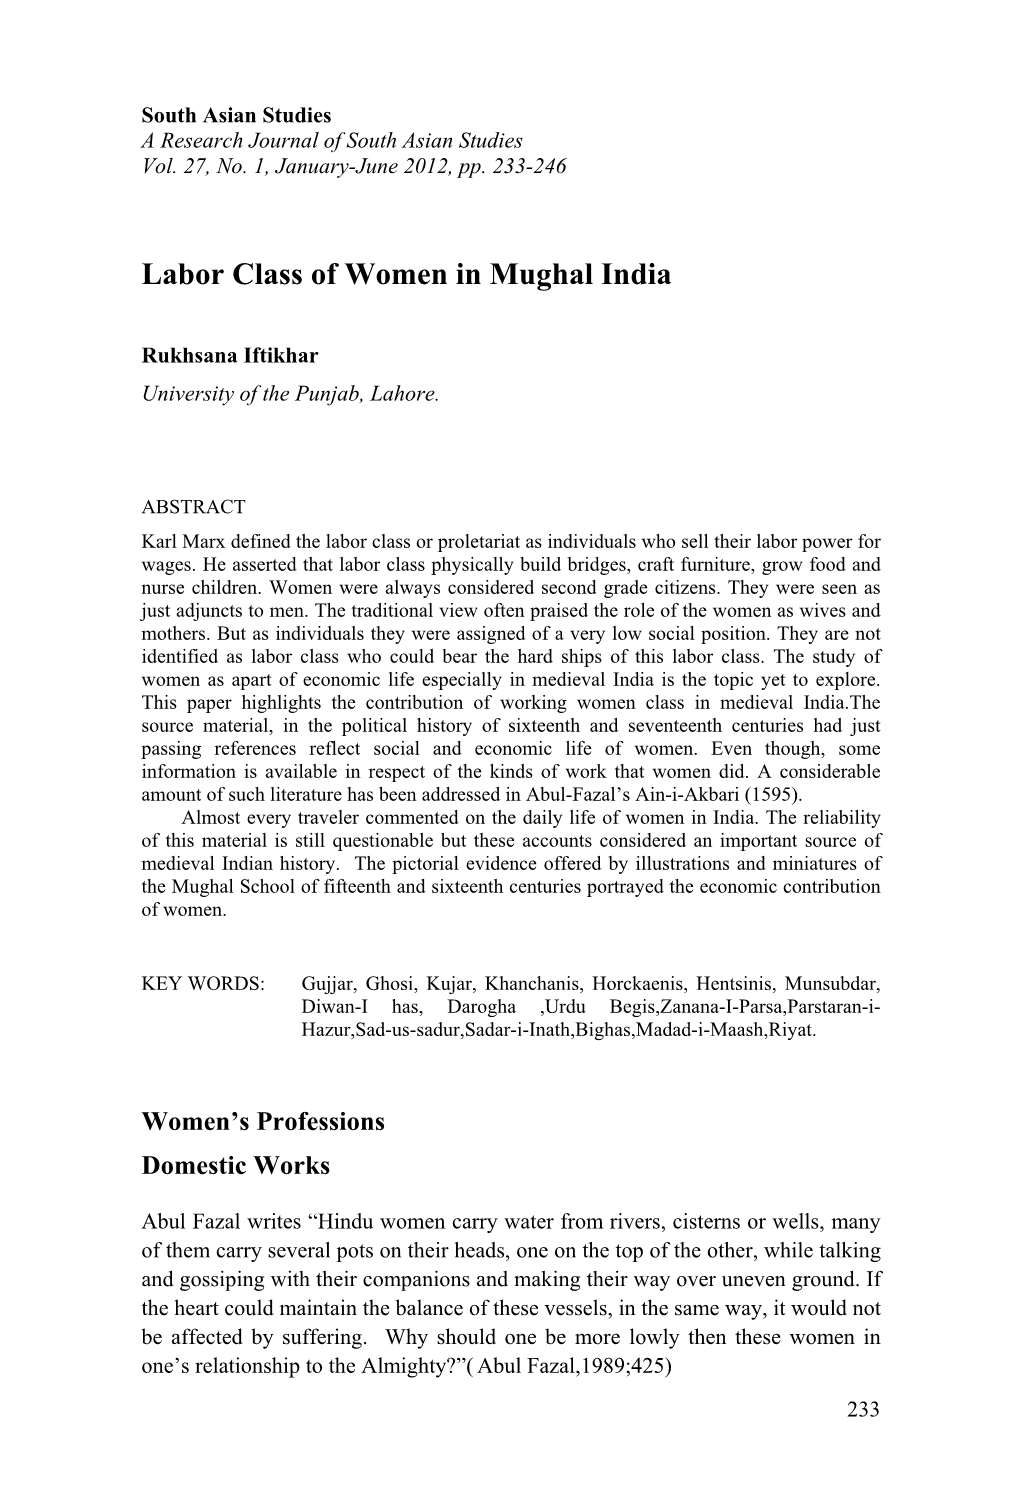 Labor Class of Women in Mughal India